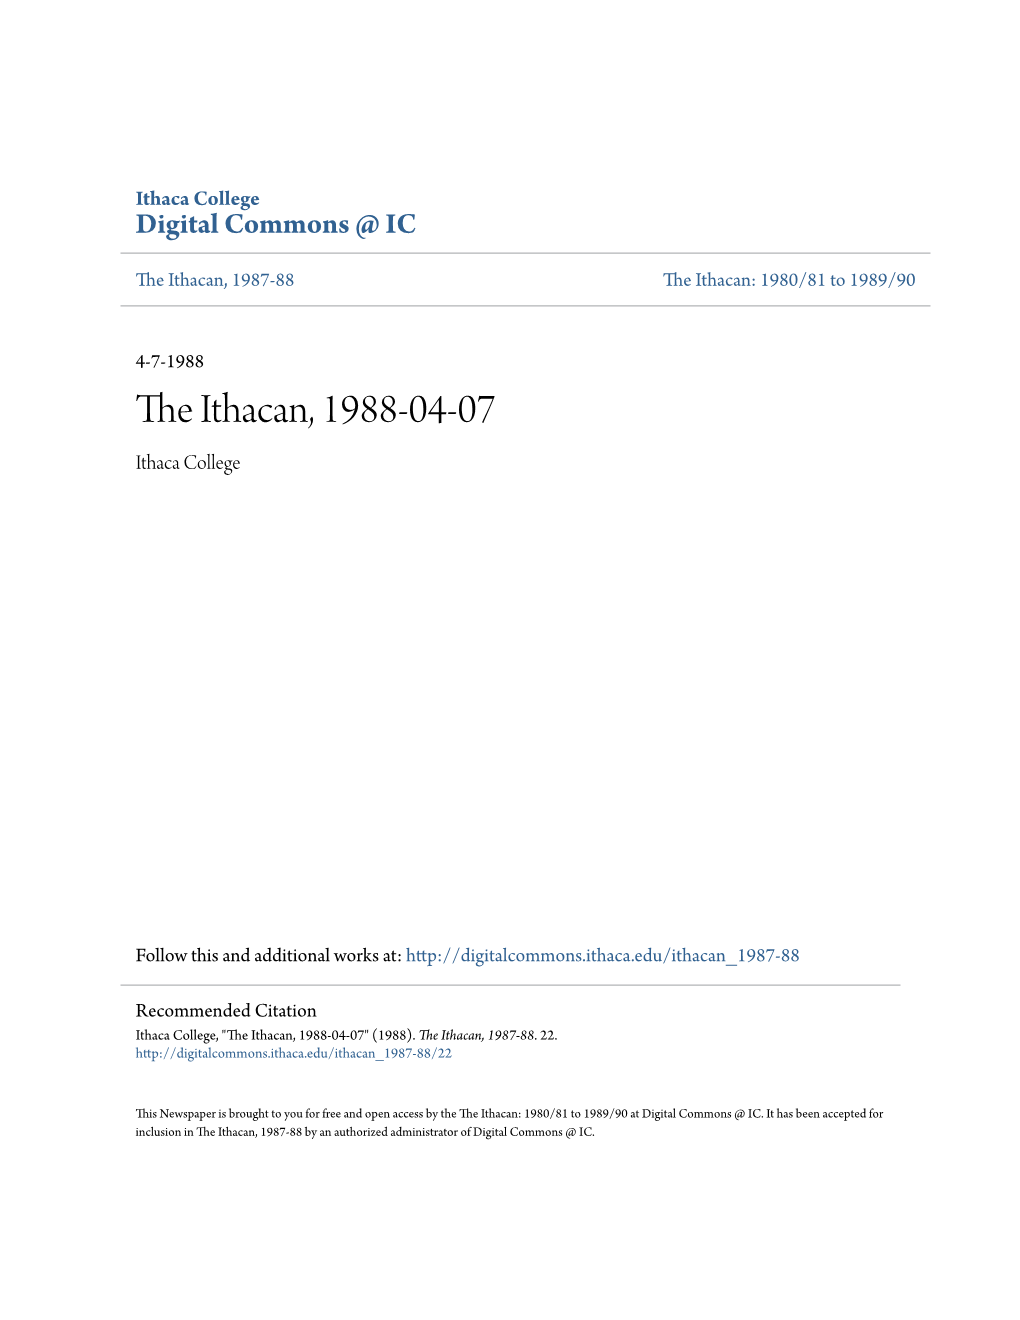 The Ithacan, 1988-04-07